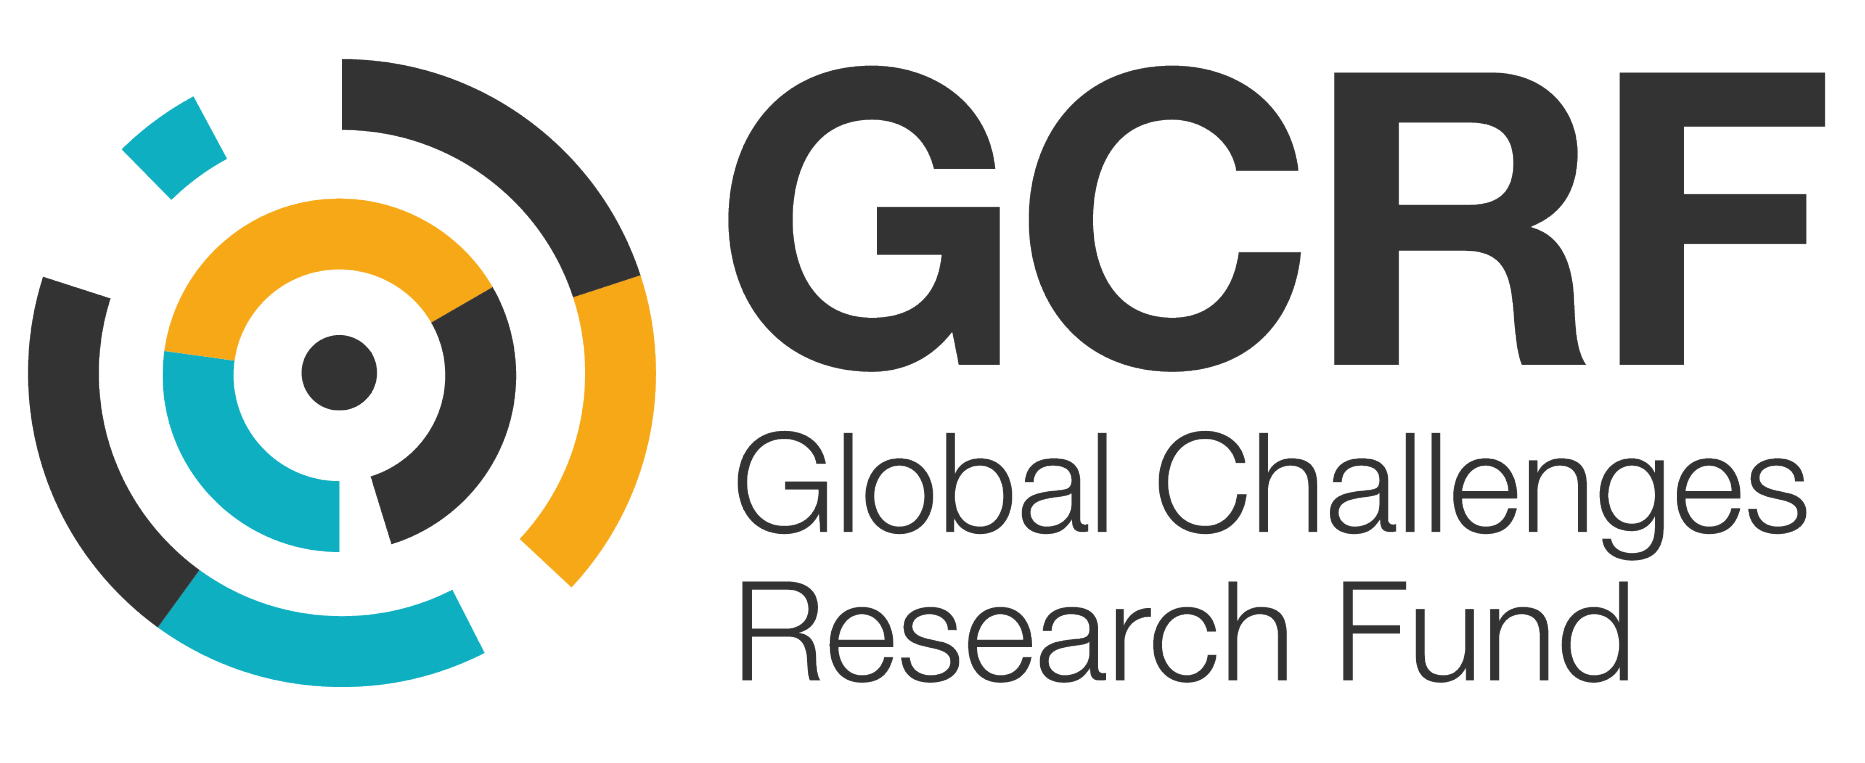 GCRF logo with text 'Global Challenges Research Fund'